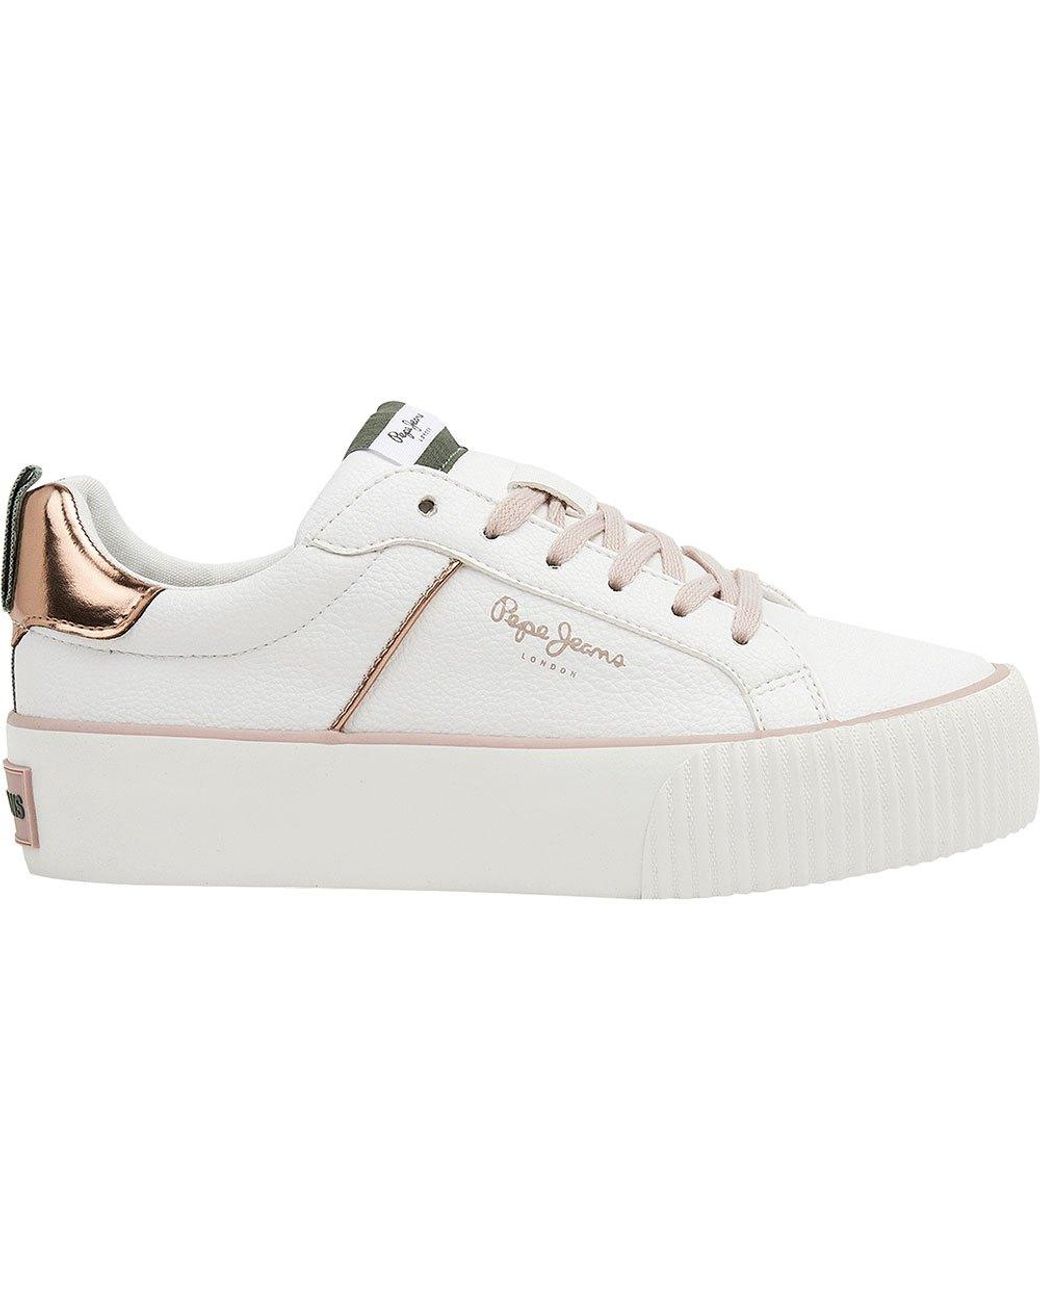 Pepe Jeans Ottis Cool Trainers in White | Lyst